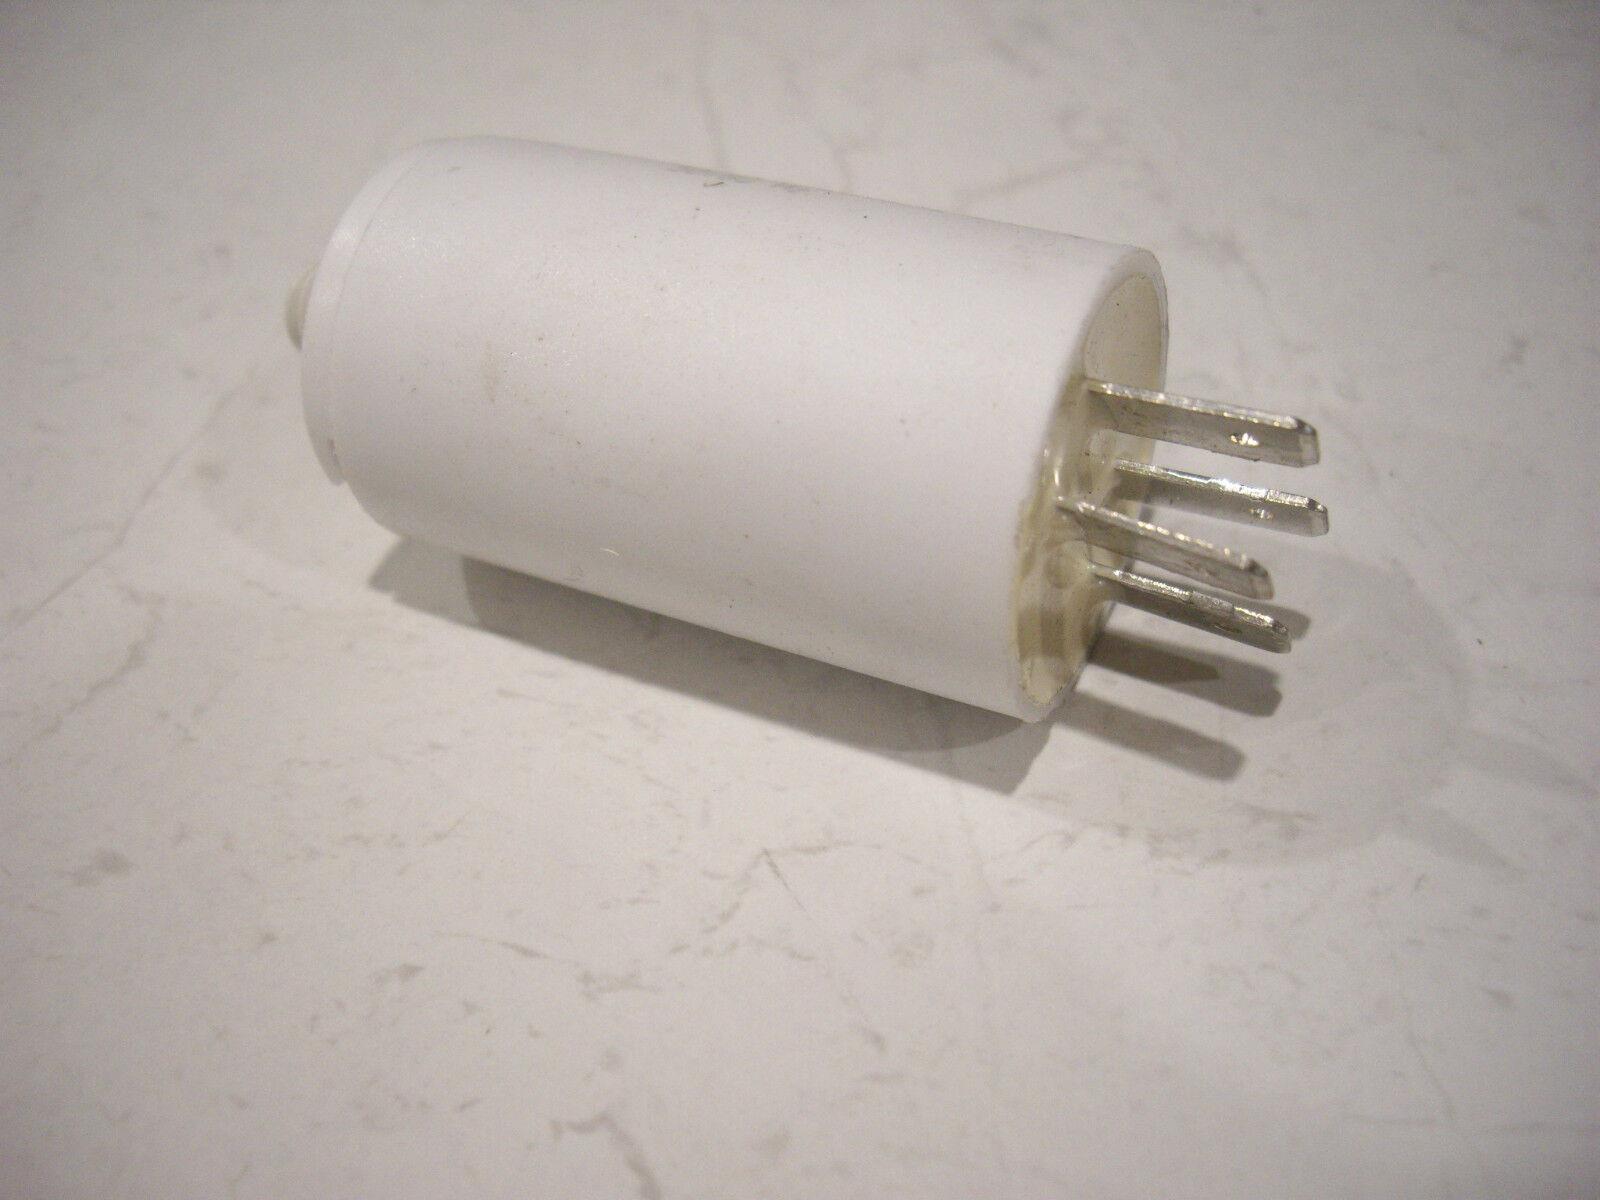 Electrolux Clothes Dryer Capacitor. Does Your Dryer Just Hum.all Models